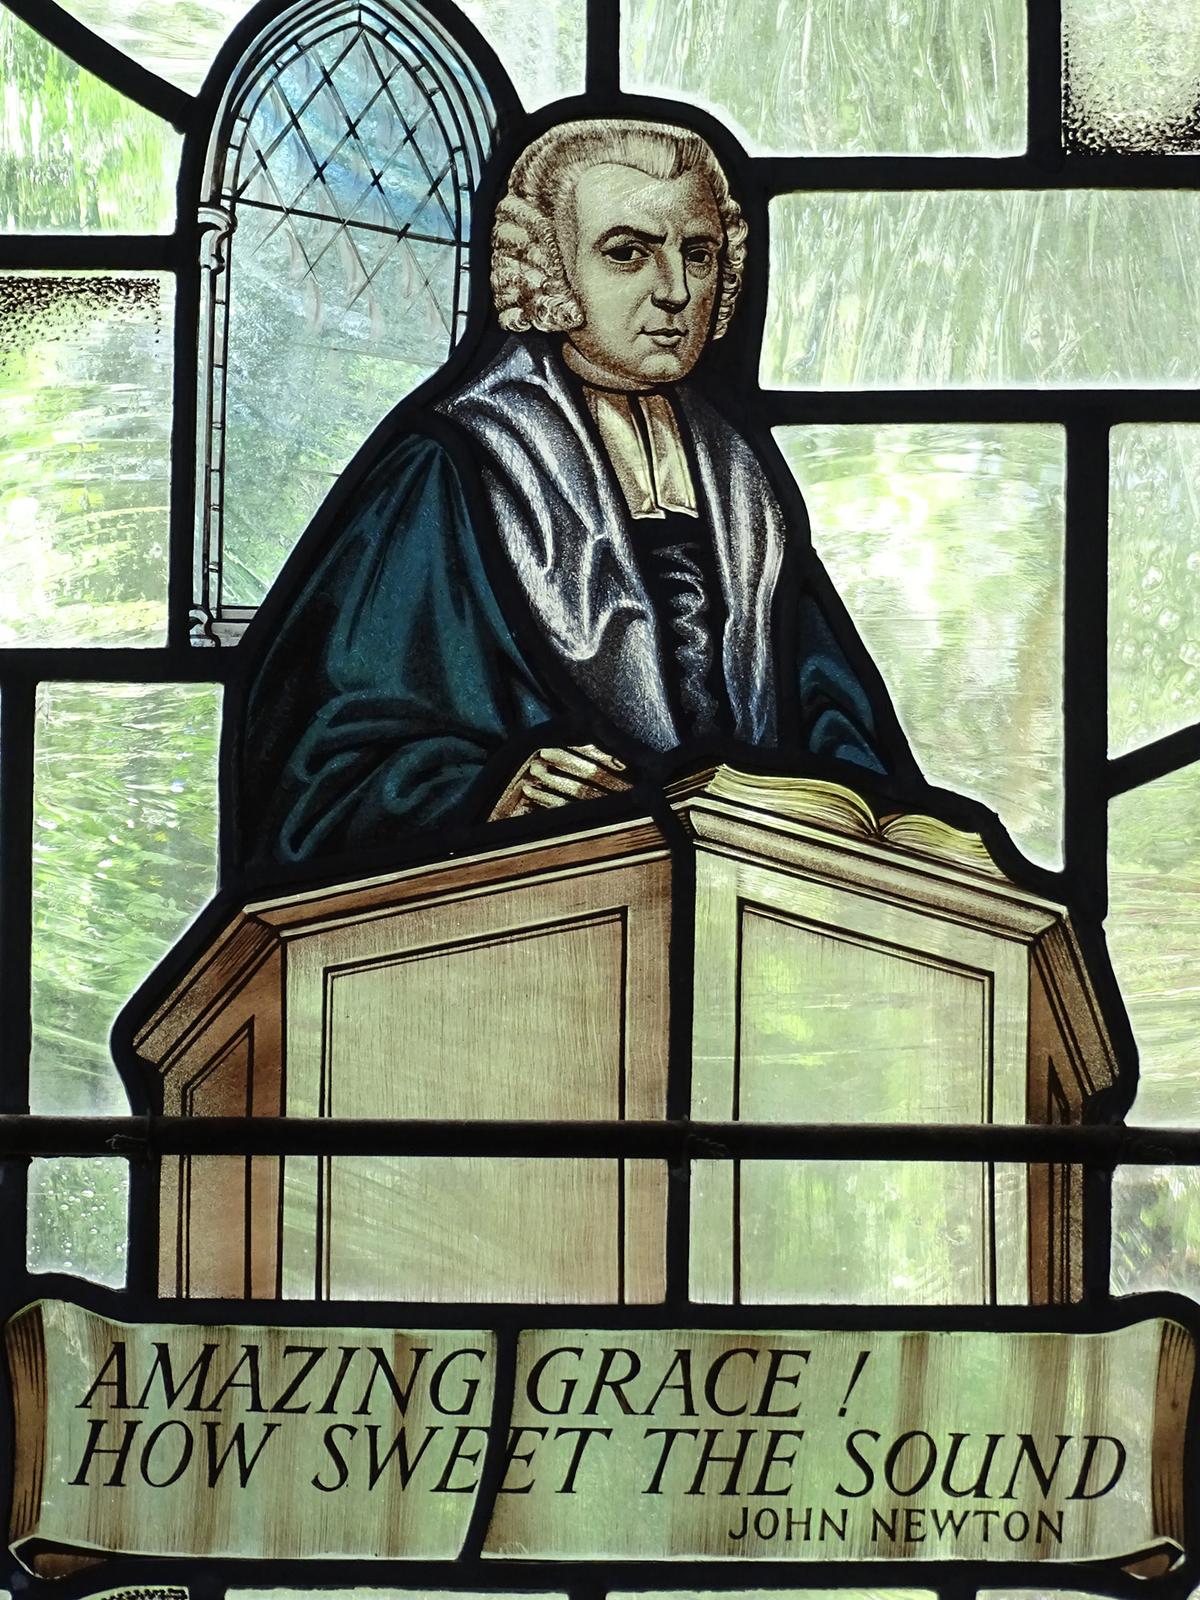 Stained glass window with John Newton, writer of "Amazing Grace," in St. Peter and Paul Church, Buckinghamshire, England. (Adam Jones/<a href="https://creativecommons.org/licenses/by-sa/2.0/deed.en">CC BY-SA 2.0</a>)